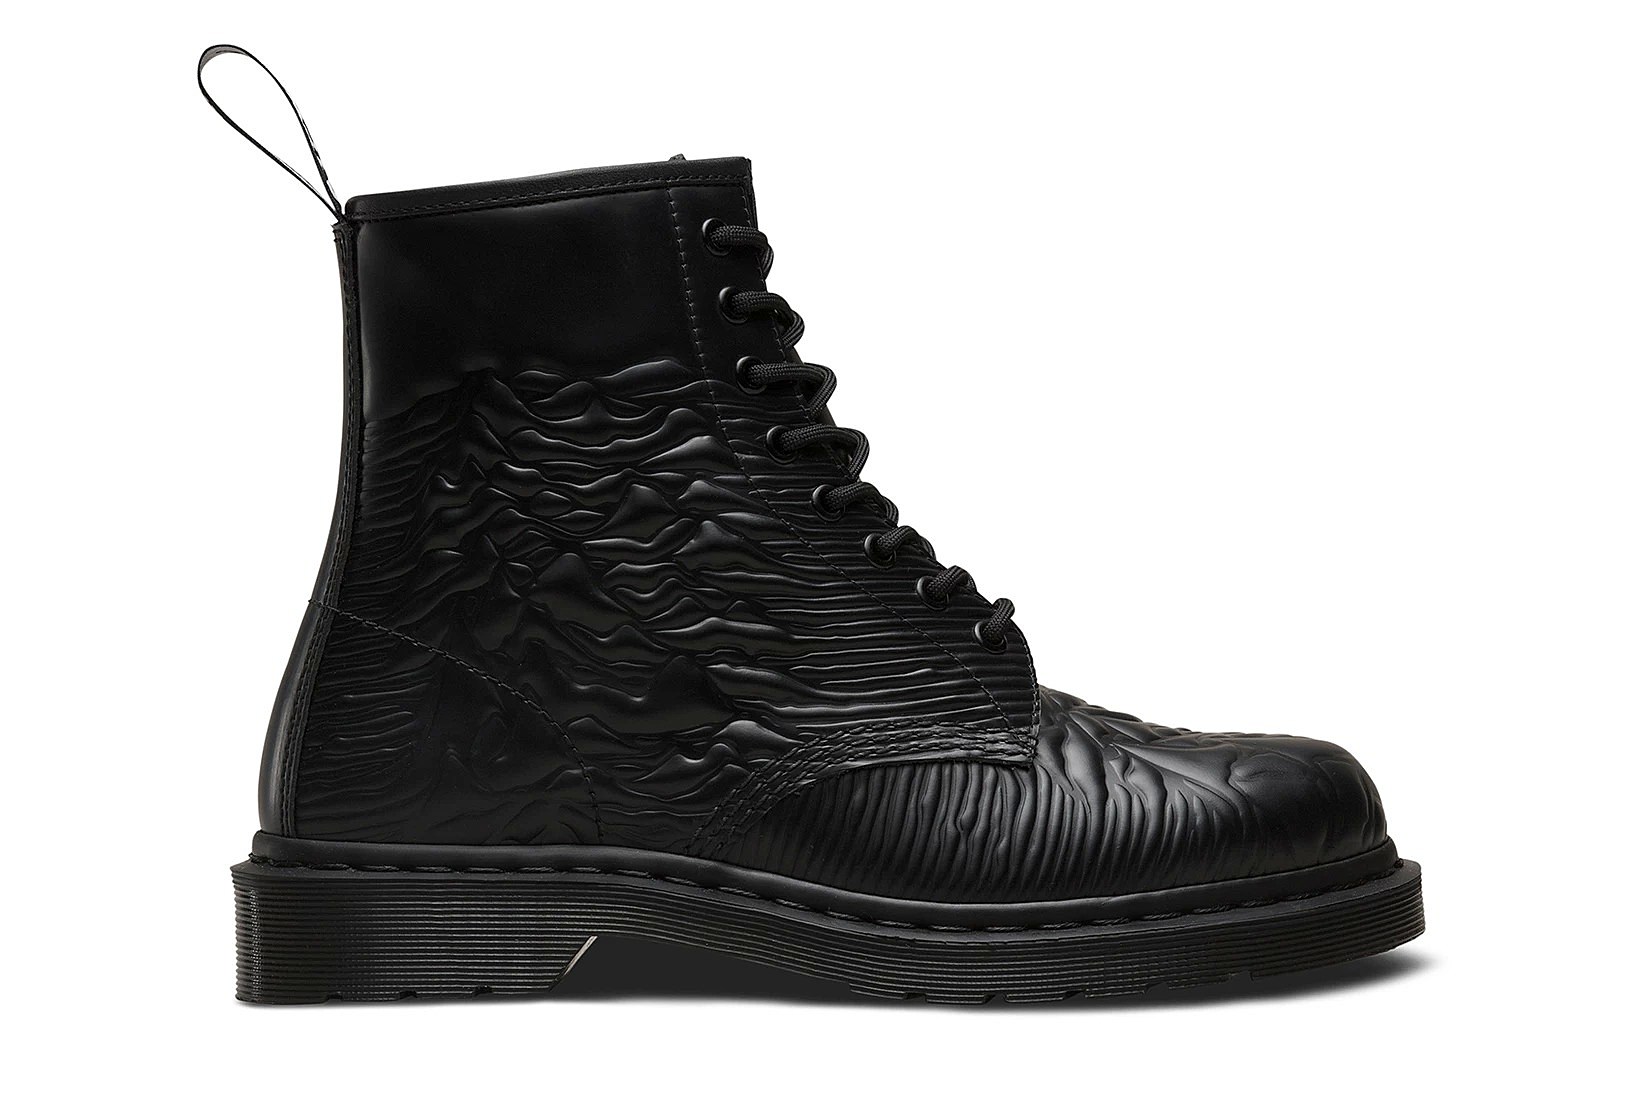 Dr. Martens made Joy Division & New Order-themed boots